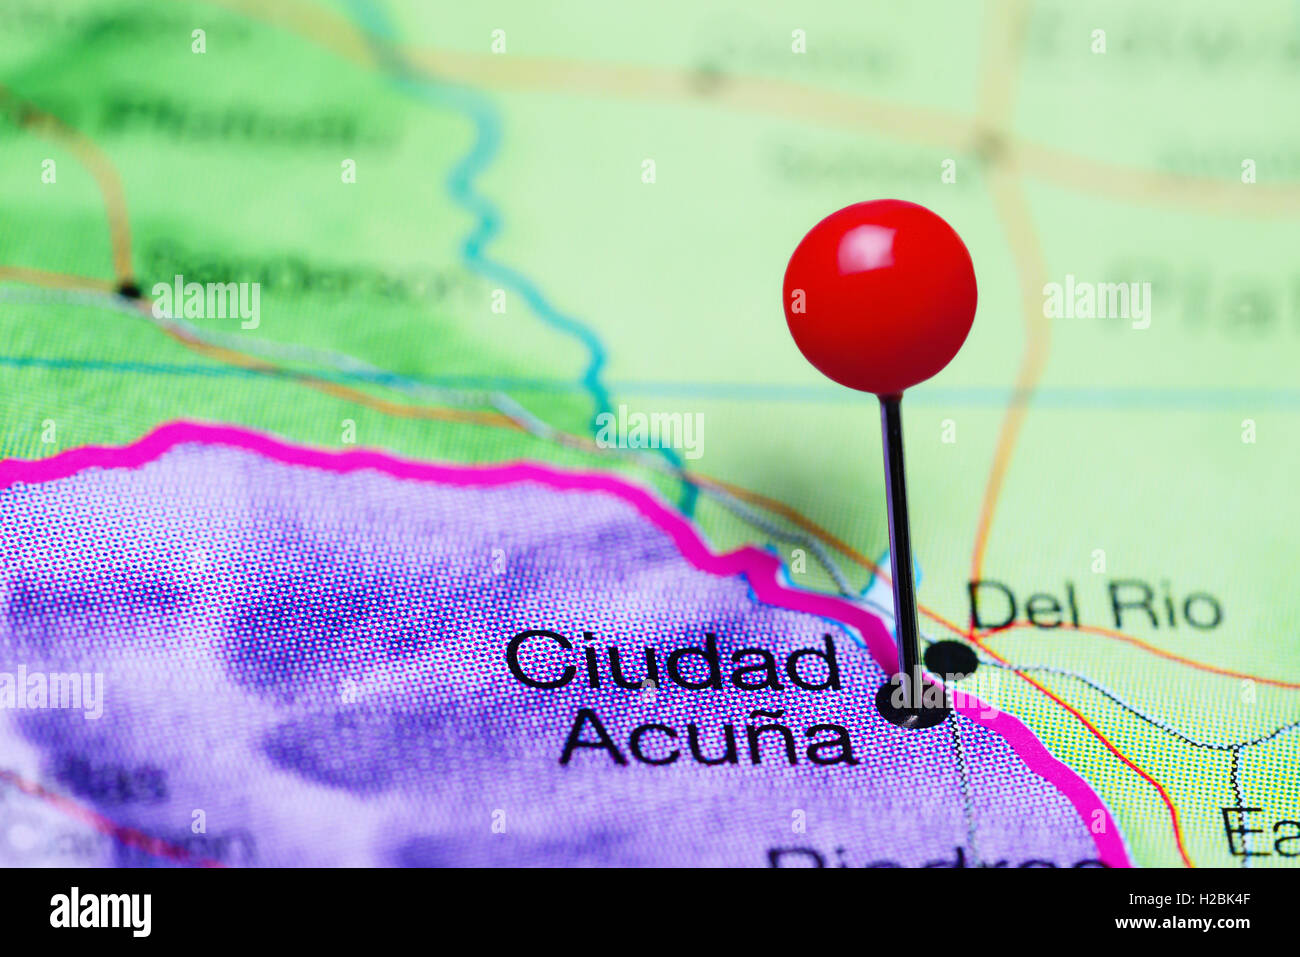 Ciudad Acuna pinned on a map of Mexico Stock Photo